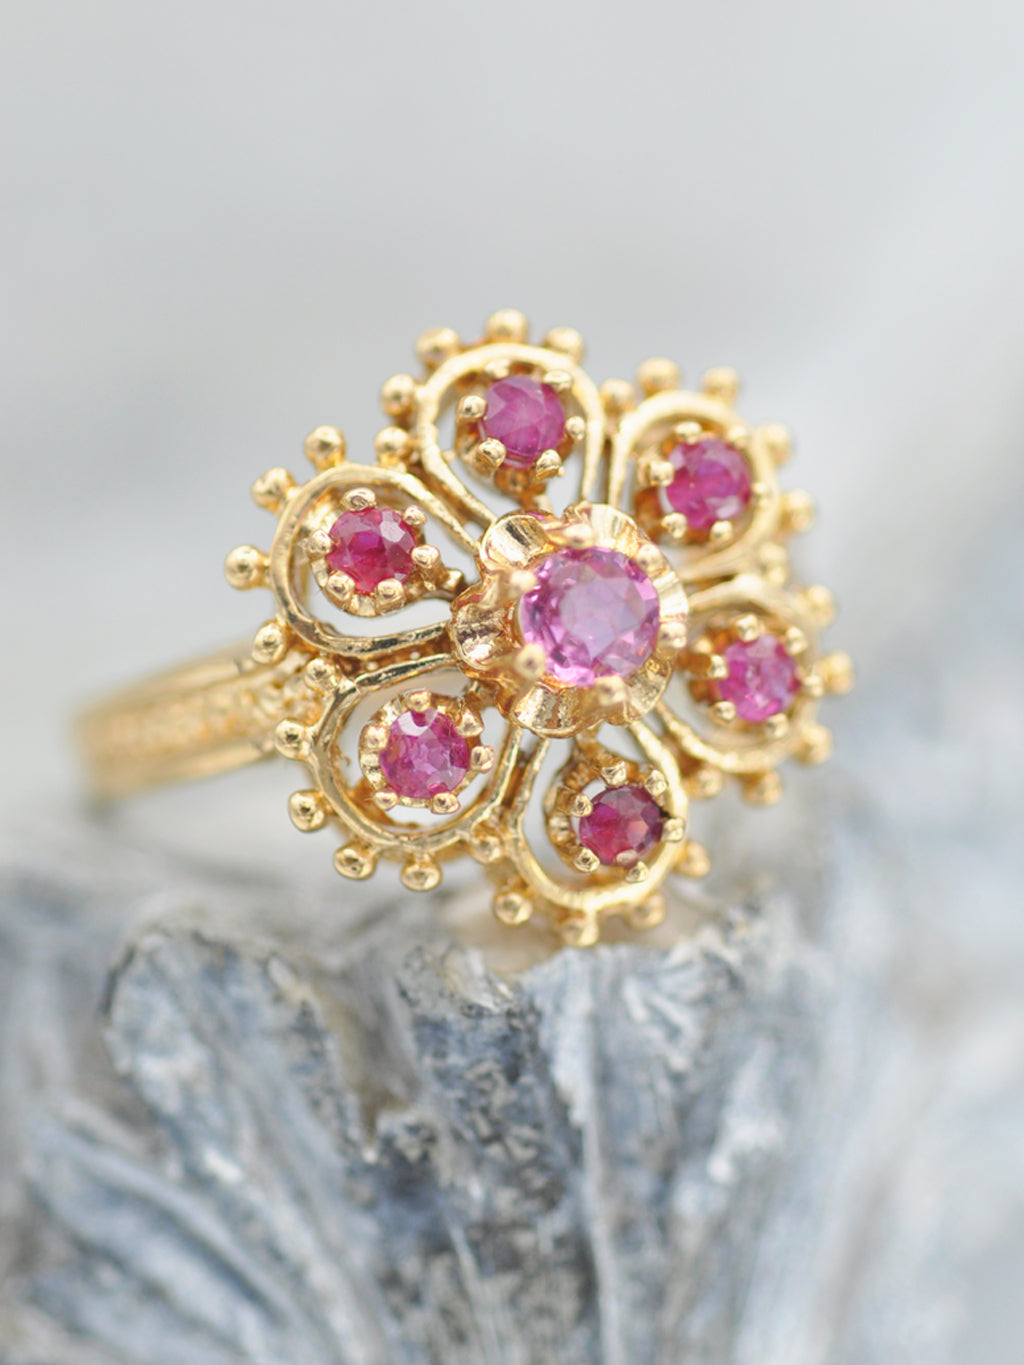 Trend We Love: 20 Floral-Inspired Engagement Rings | Round diamond  engagement rings, Wedding rings round, Vintage engagement rings